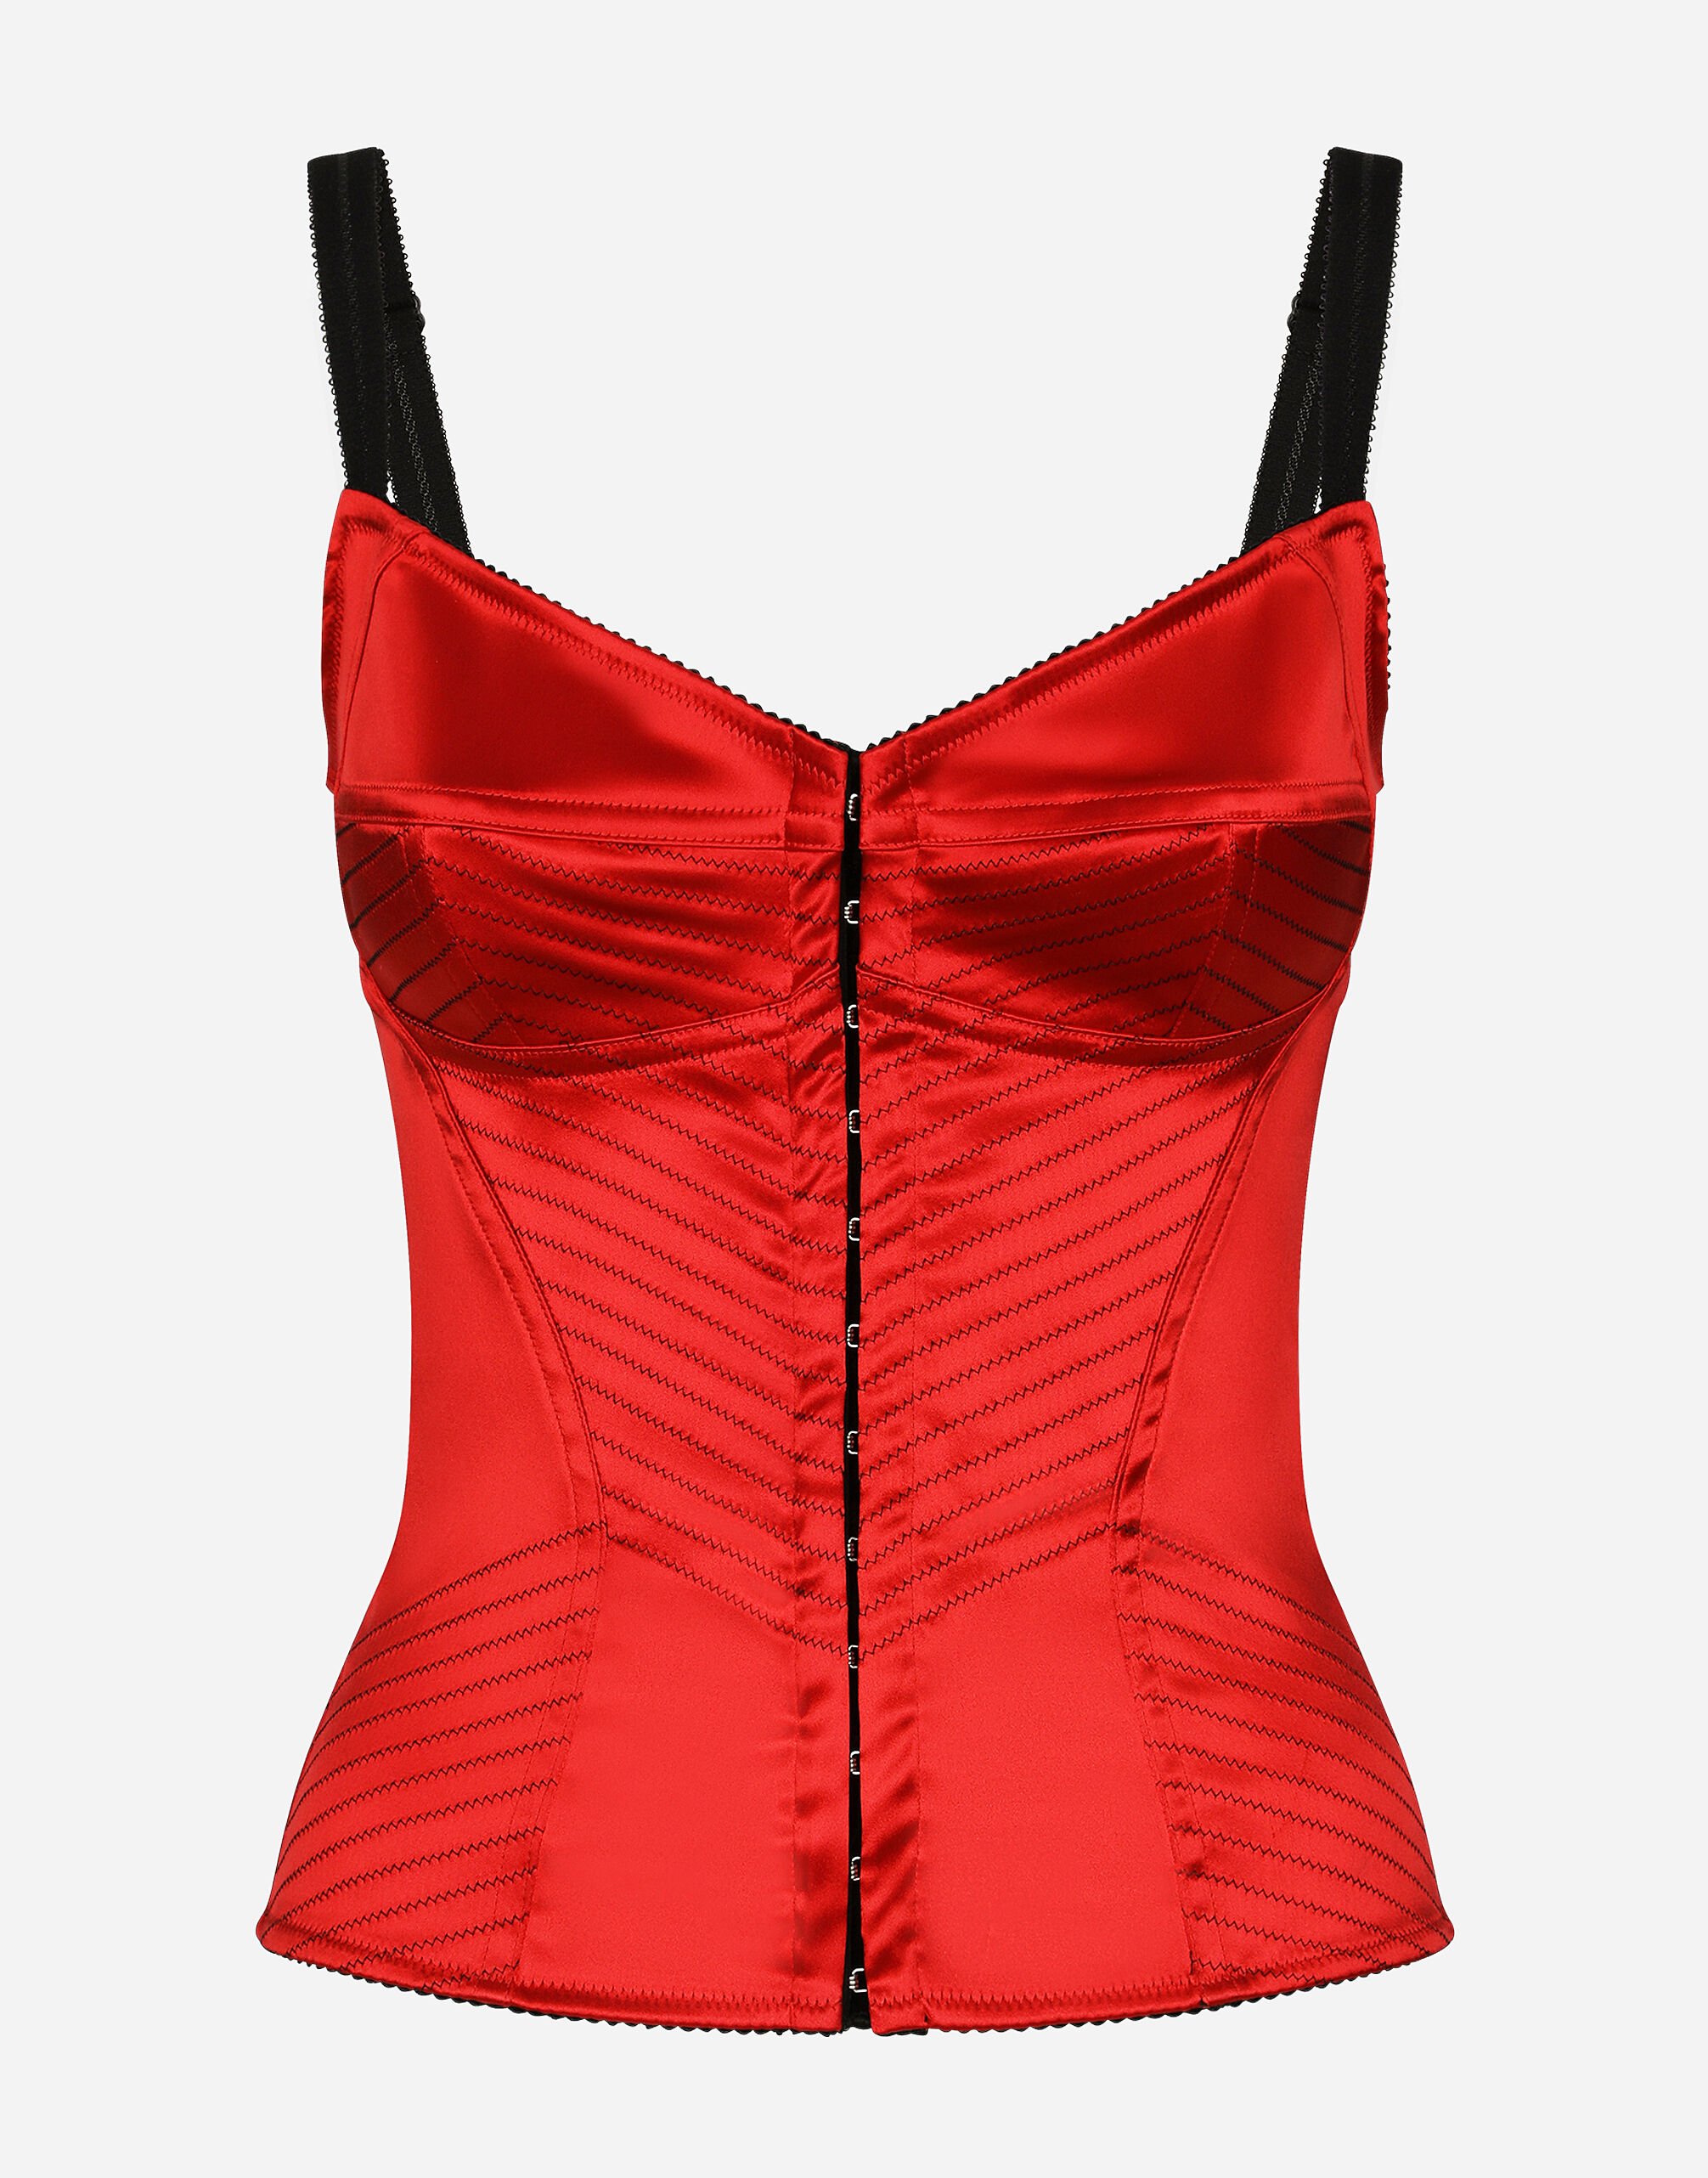 Dolce & Gabbana Satin corset with top-stitching and hook-and-eye fastenings Black F75O9TFUSOP